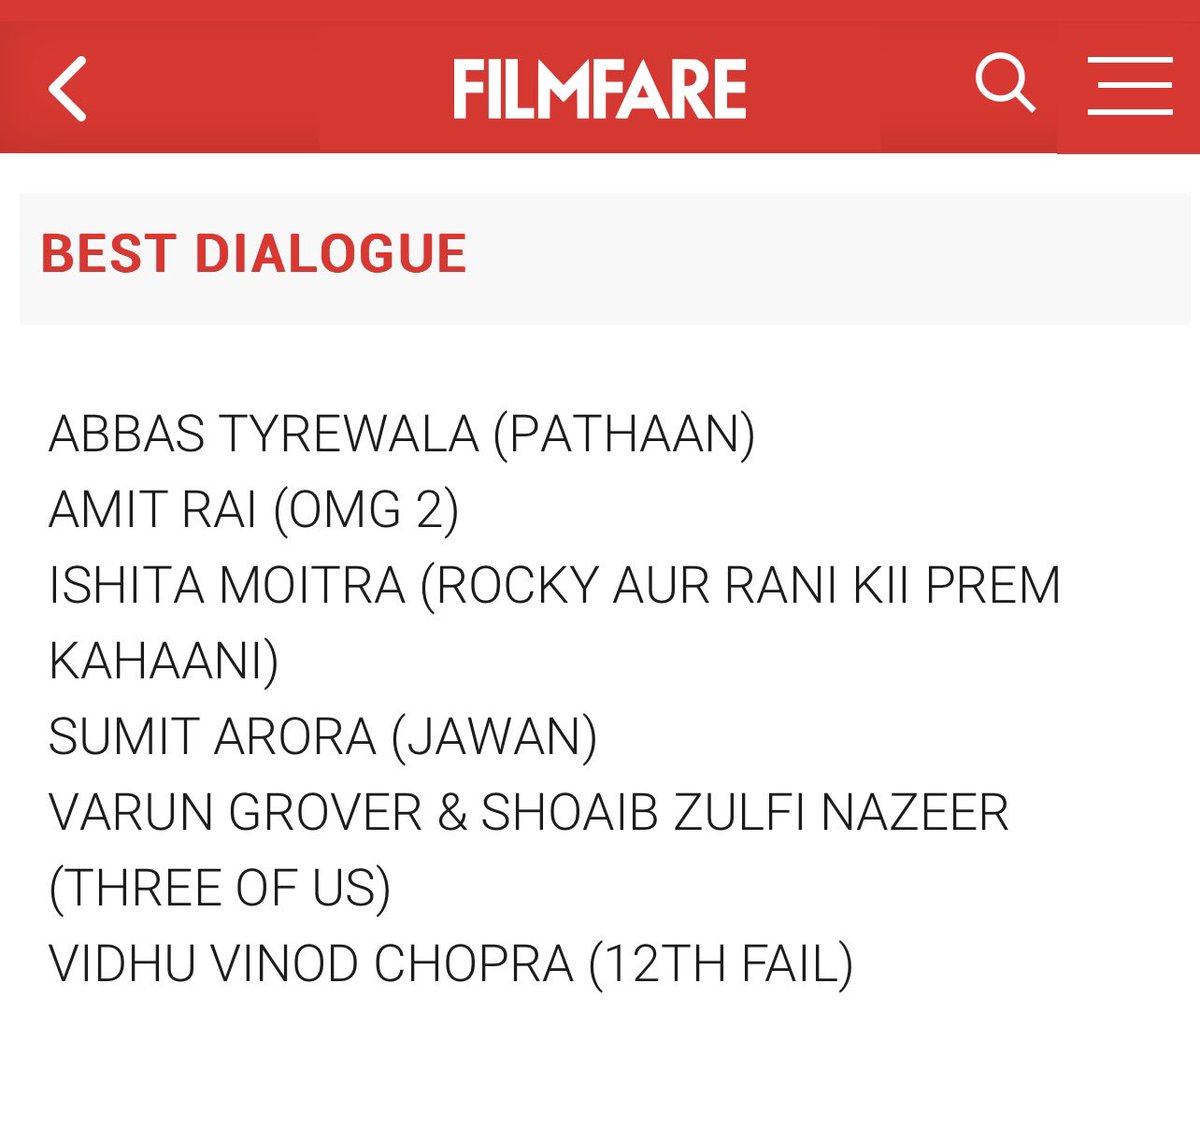 Thank you @filmfare for best dialogue nomination #Jawan